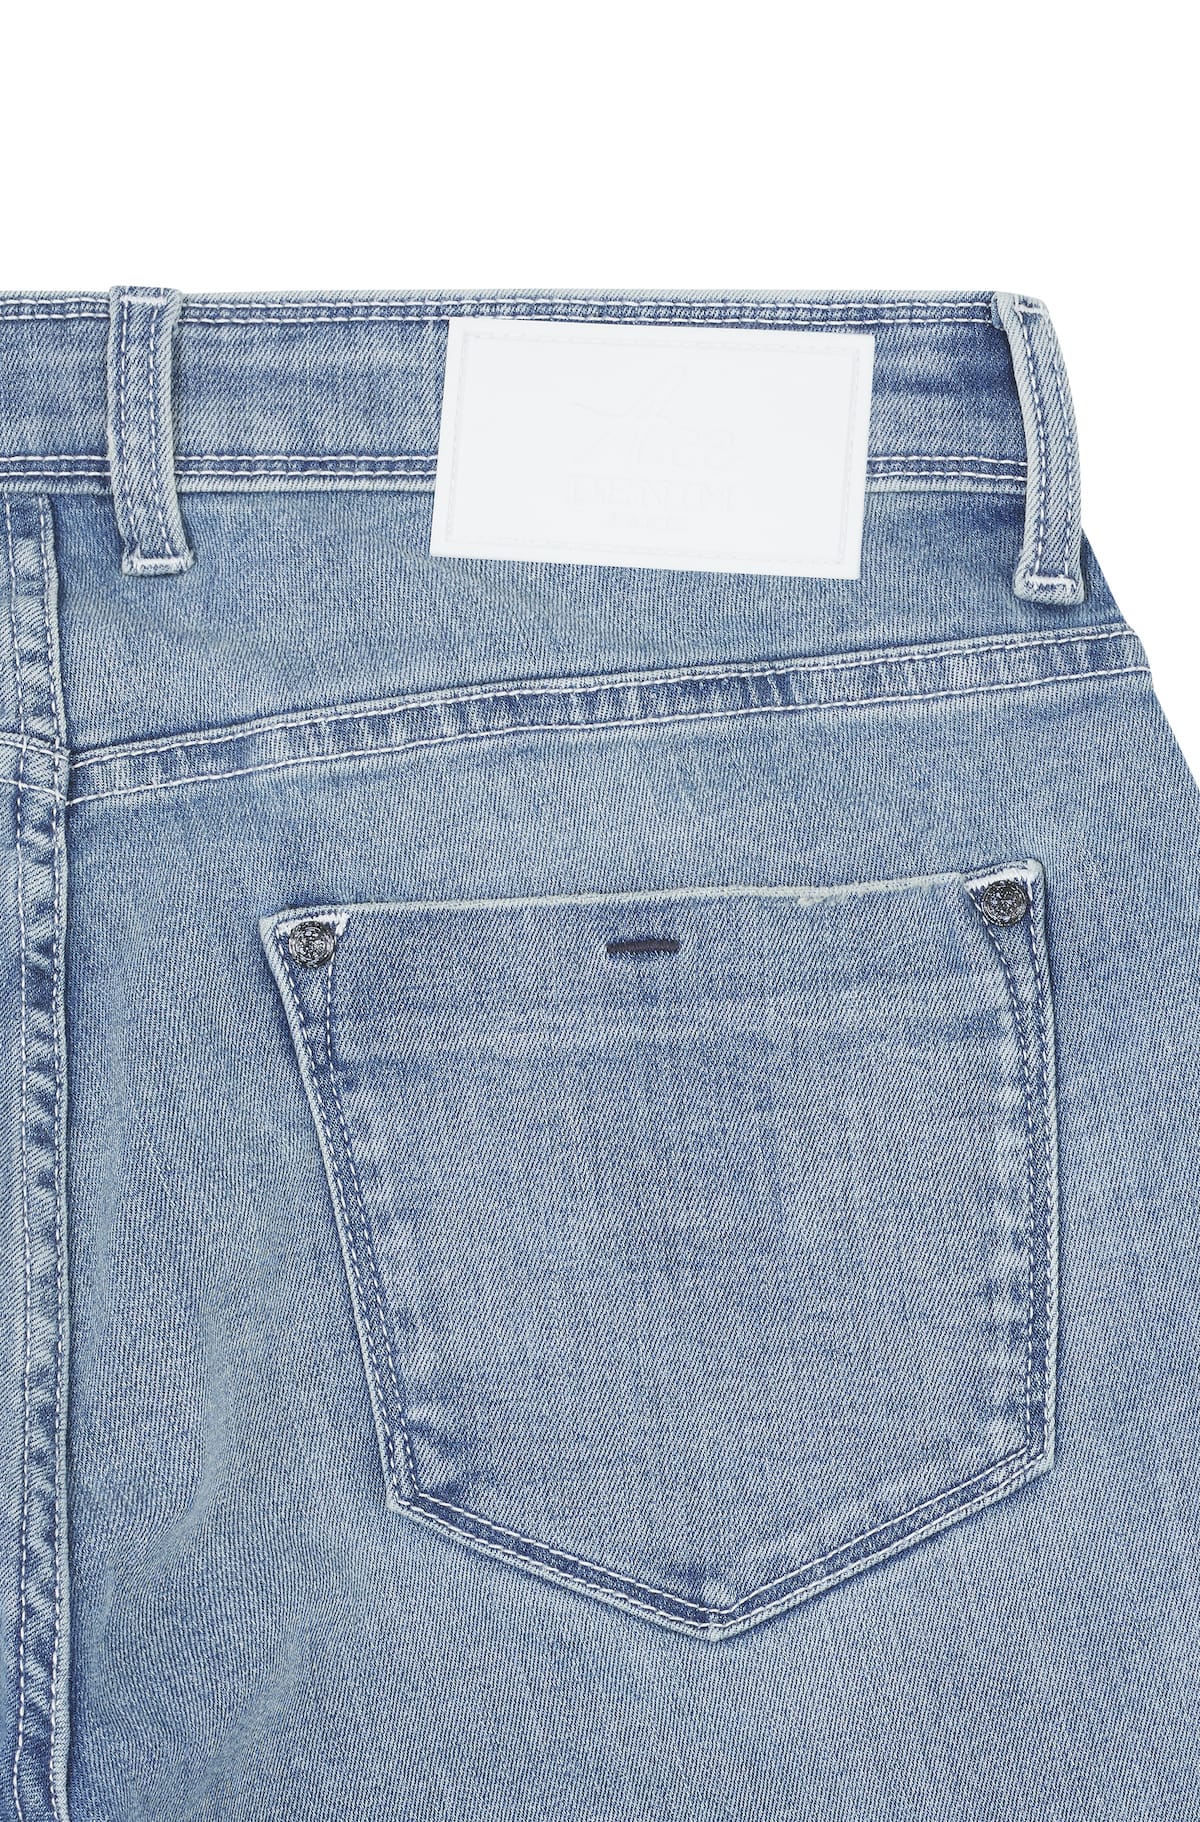 AD 05 Denim - Extra Bleached/ White